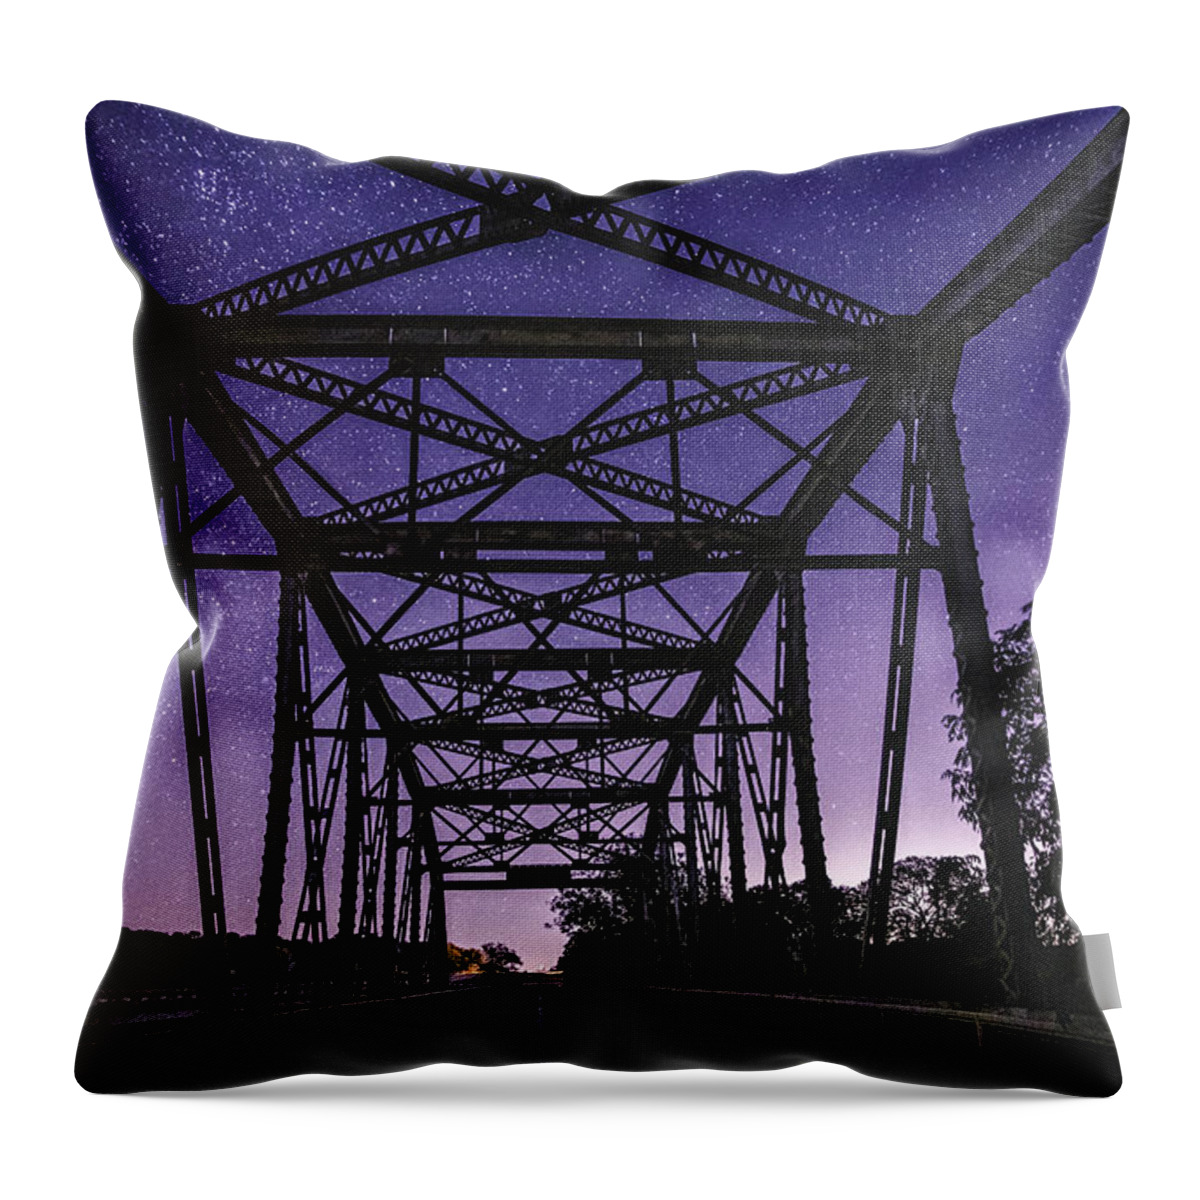 2019 Throw Pillow featuring the photograph Bridge to Tomorrow by KC Hulsman